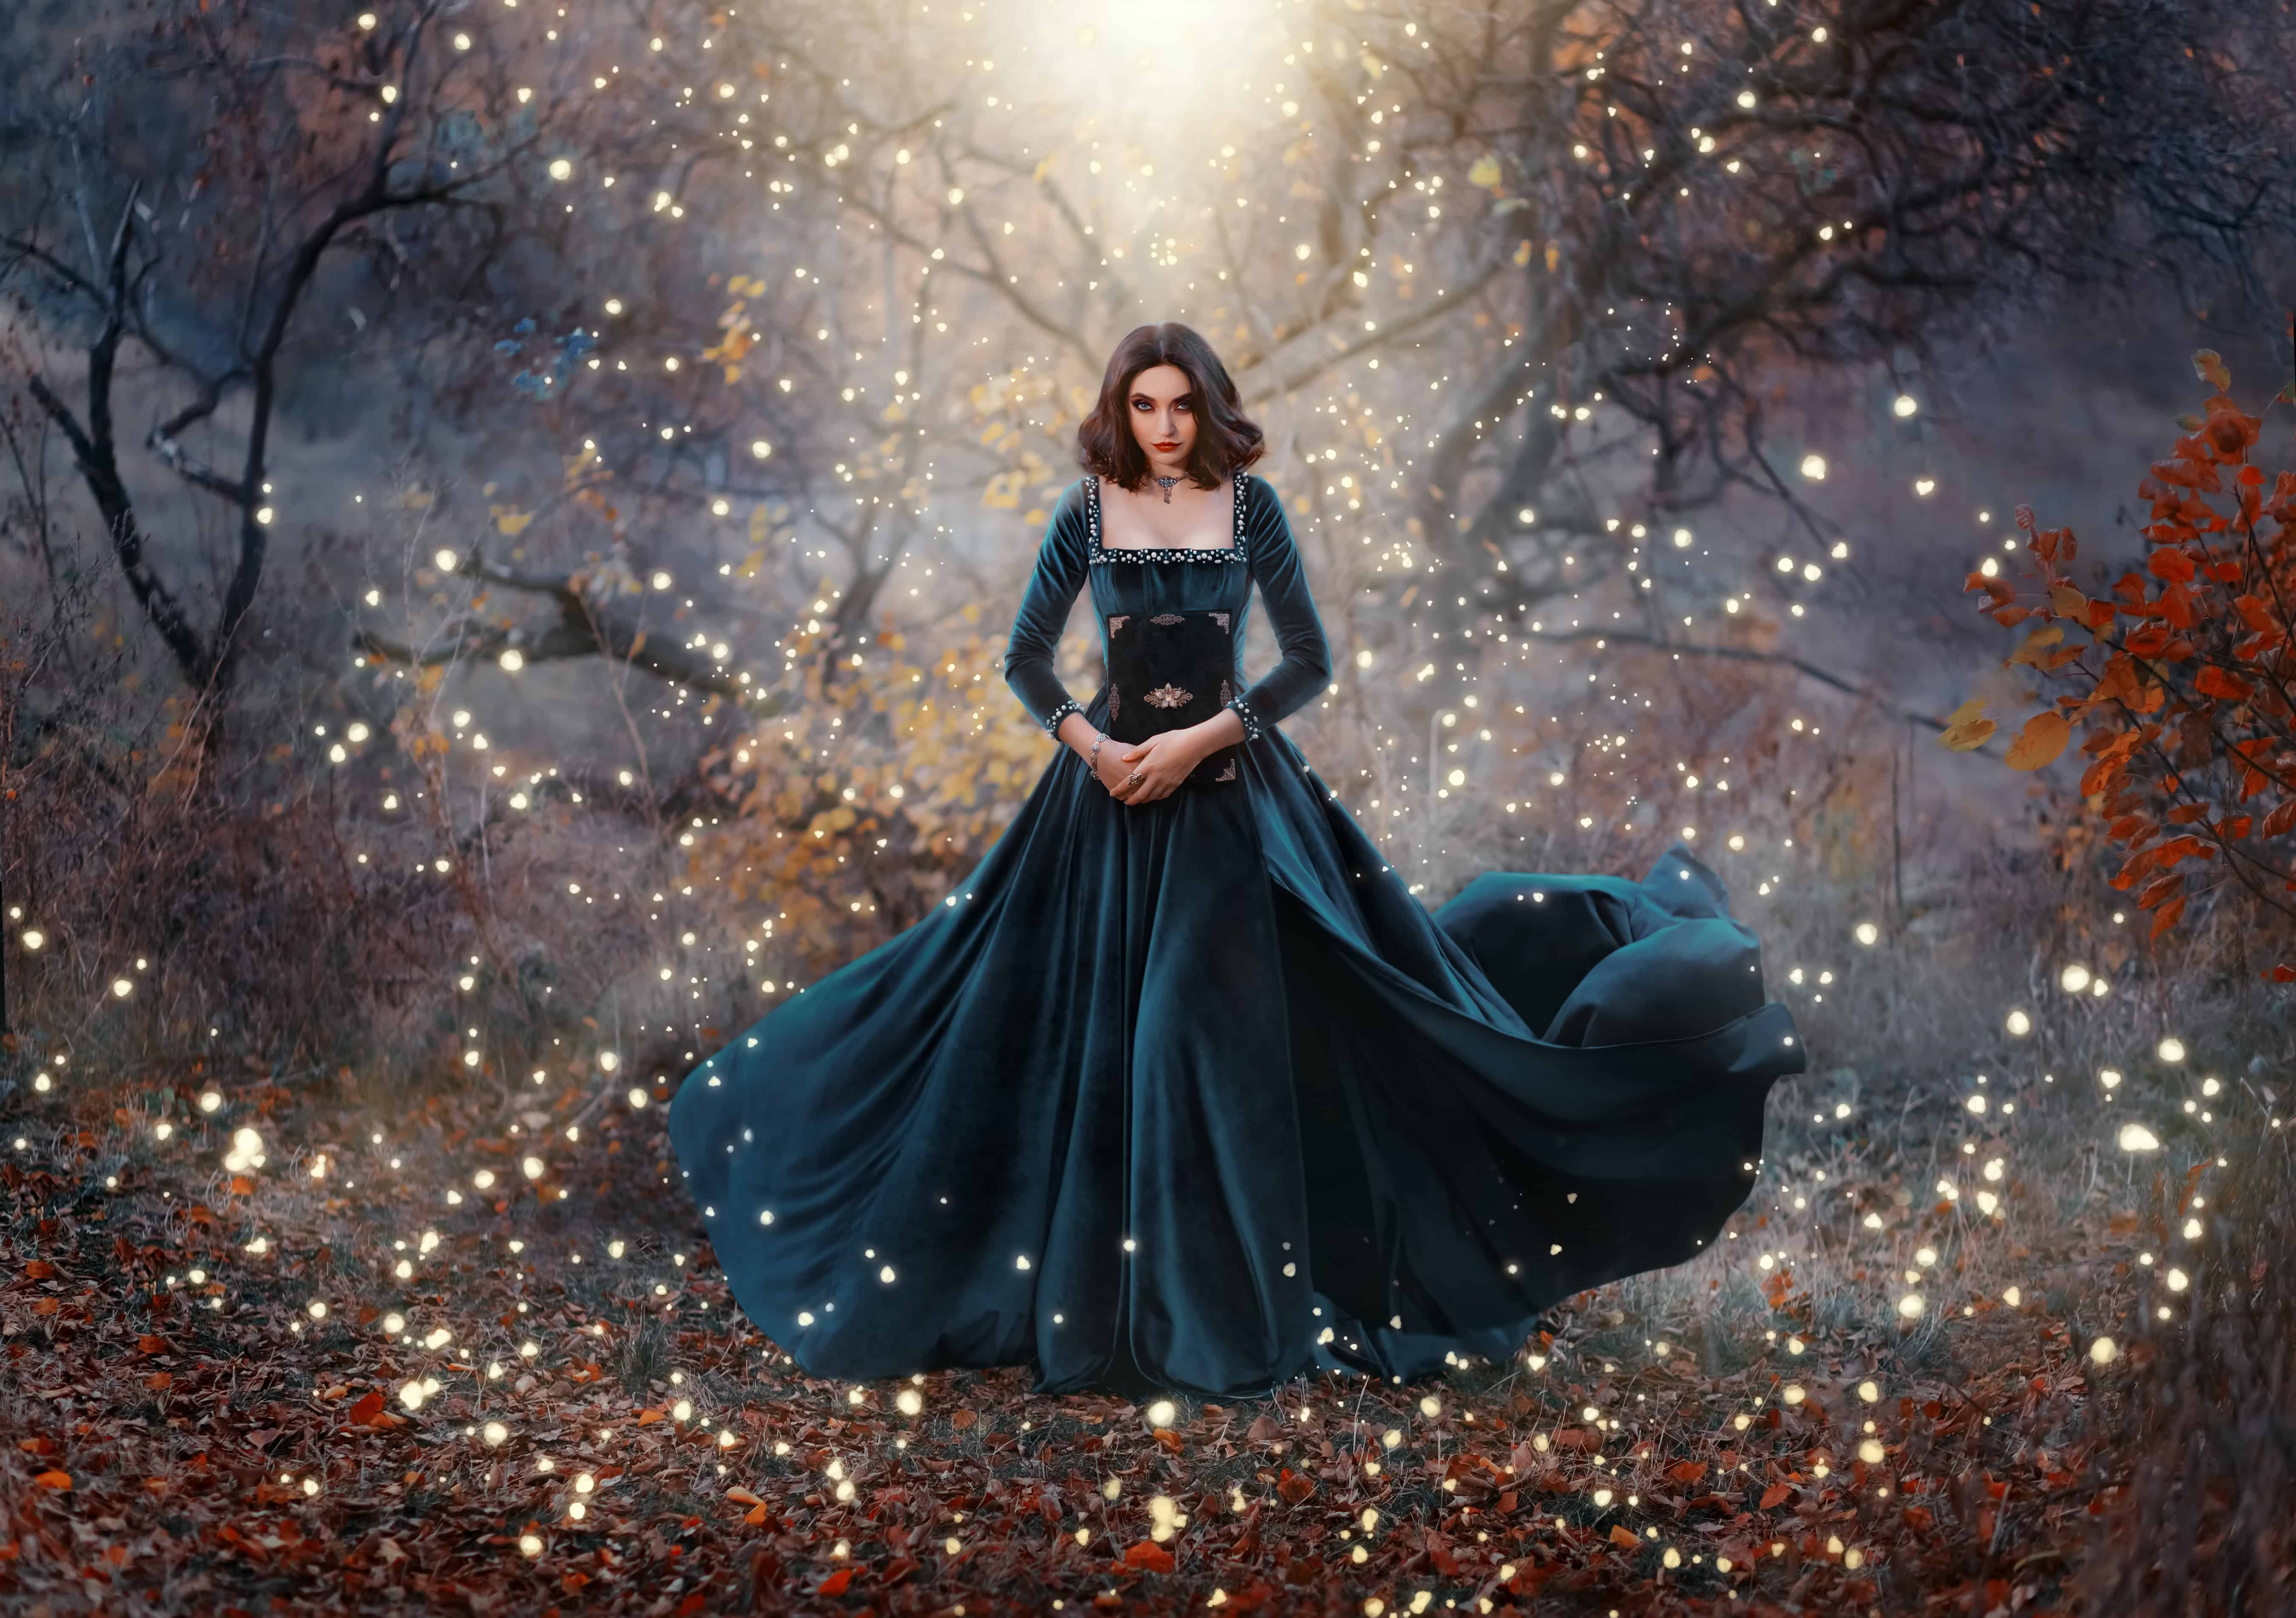 Gothic fantasy woman witch holding magic book hands. Long black velvet medieval vintage dress flies wind. Girl conjures. Bright divine light glow sparkles magic circle around lady. Autumn forest tree. 